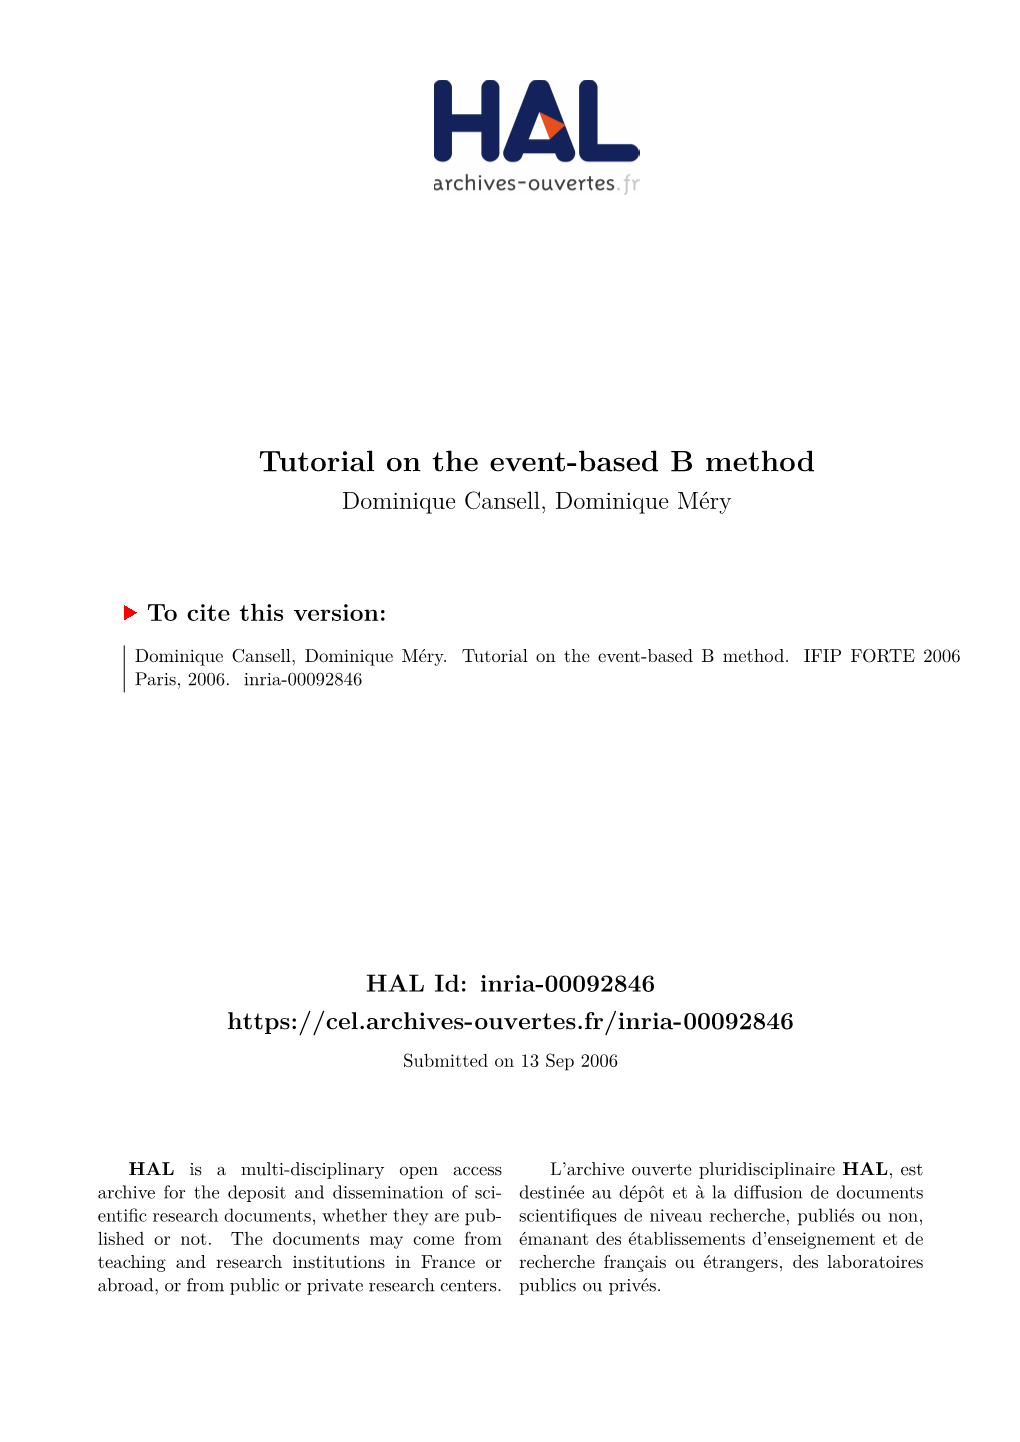 Tutorial on the Event-Based B Method Dominique Cansell, Dominique Méry